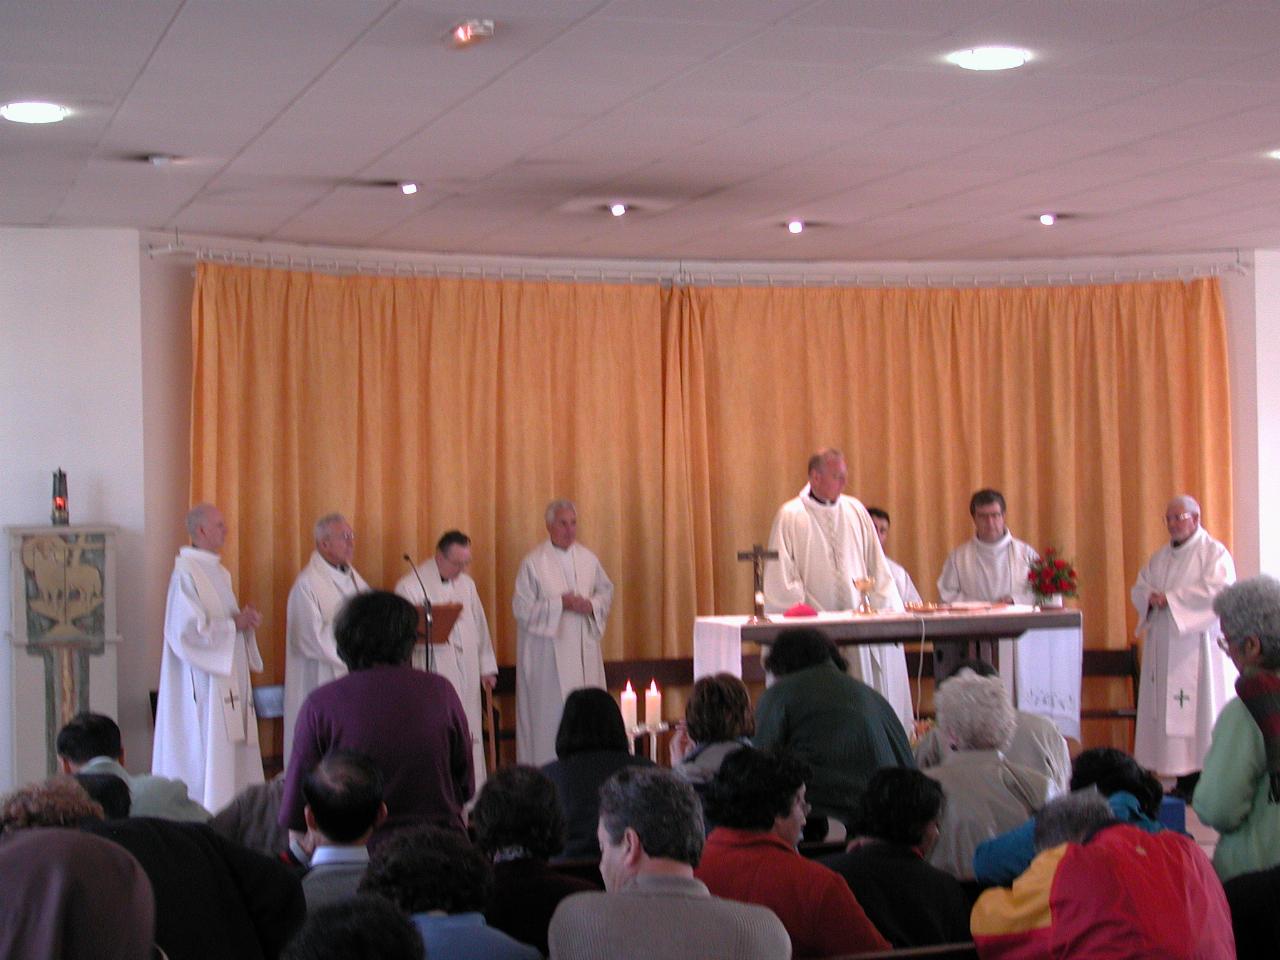 Australian and British Mass at chapel of Sts. Cosmos and Damien at Lourdes